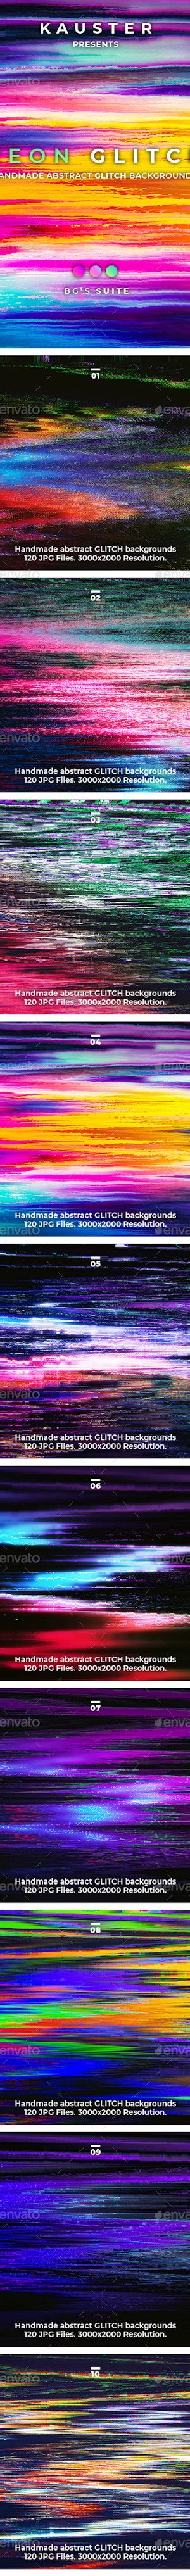 120 Neon Glitch Backgrounds By Kauster Graphicriver